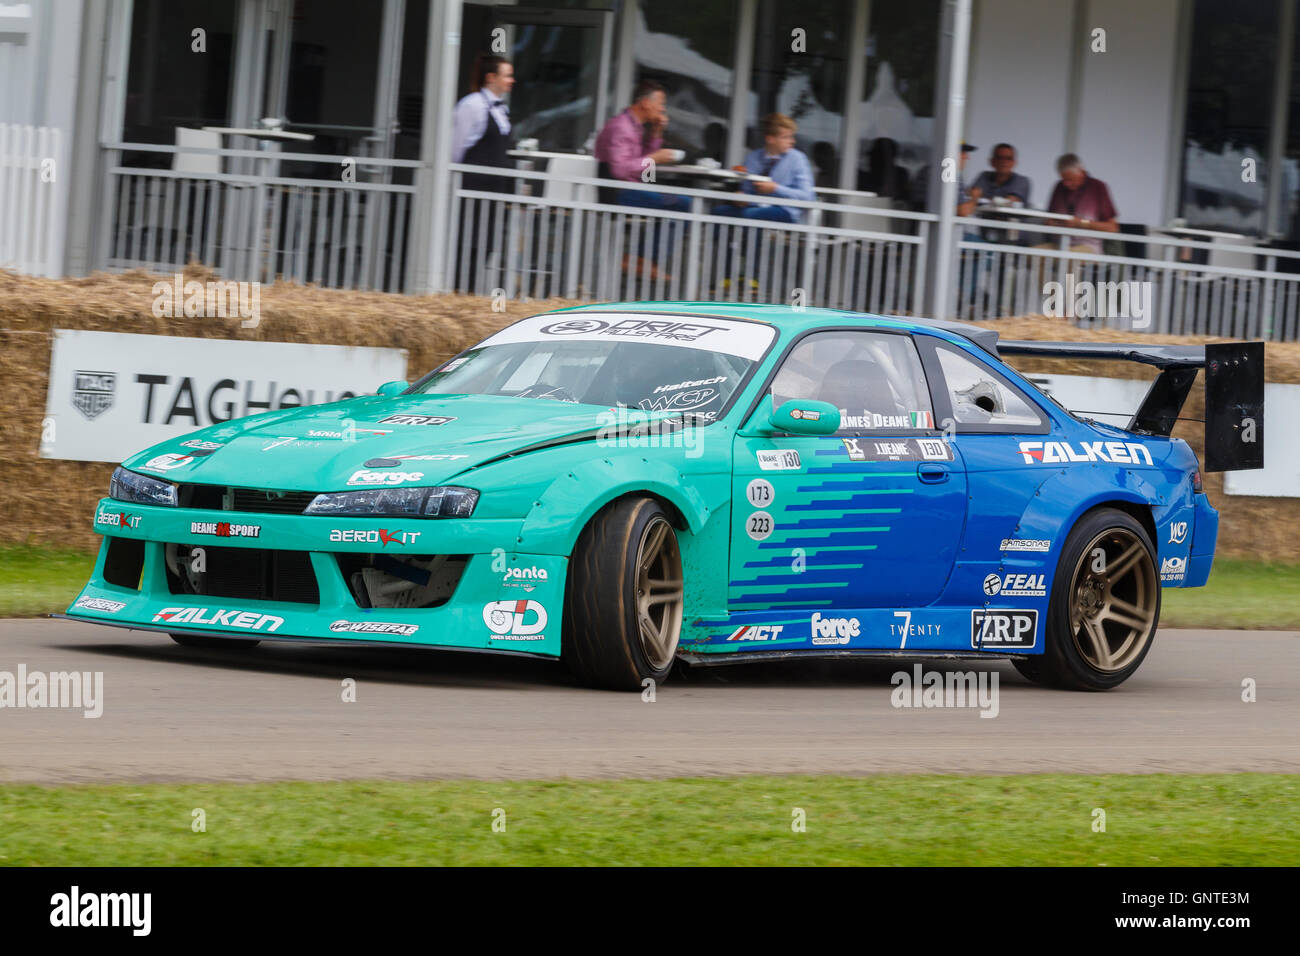 1993 Nissan 200SX S14 'Drift' car with driver James Deane at the 2016 Goodwood Festival Of Speed, Sussex, UK Stock Photo